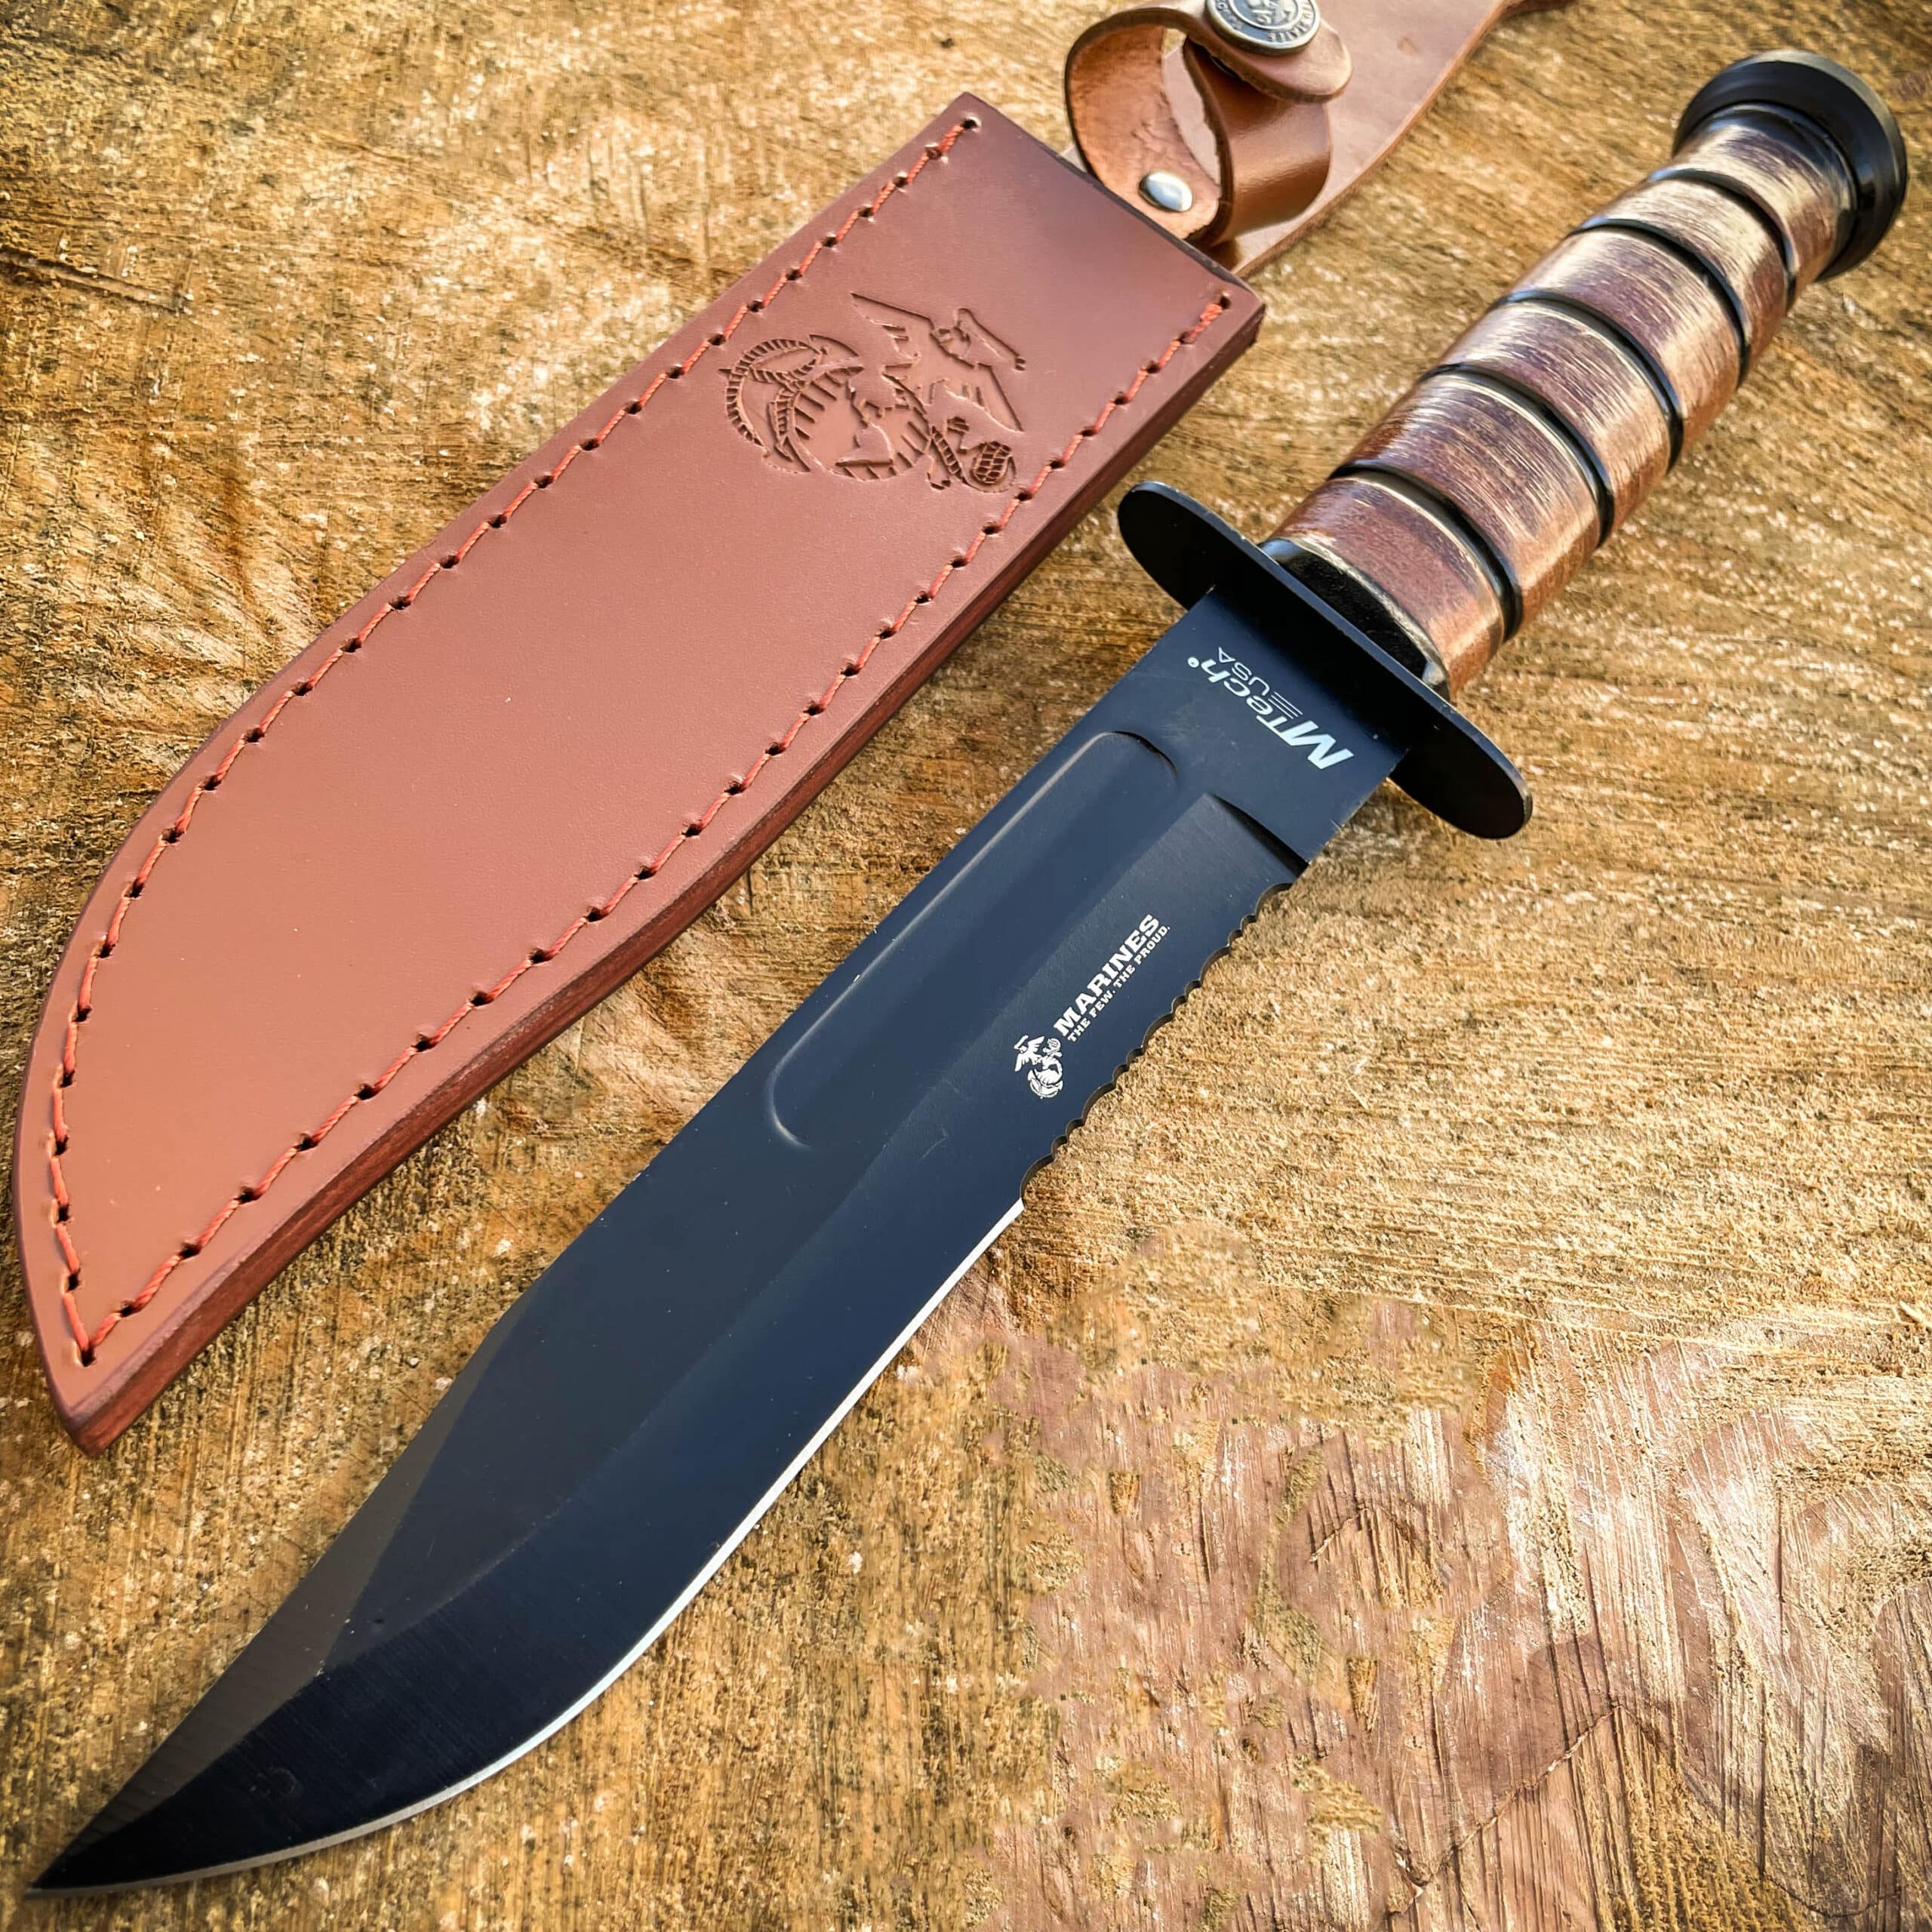 USMC COMBAT FIGHTER KNIFE - FIXED BLADE WITH LEATHER SHEATH